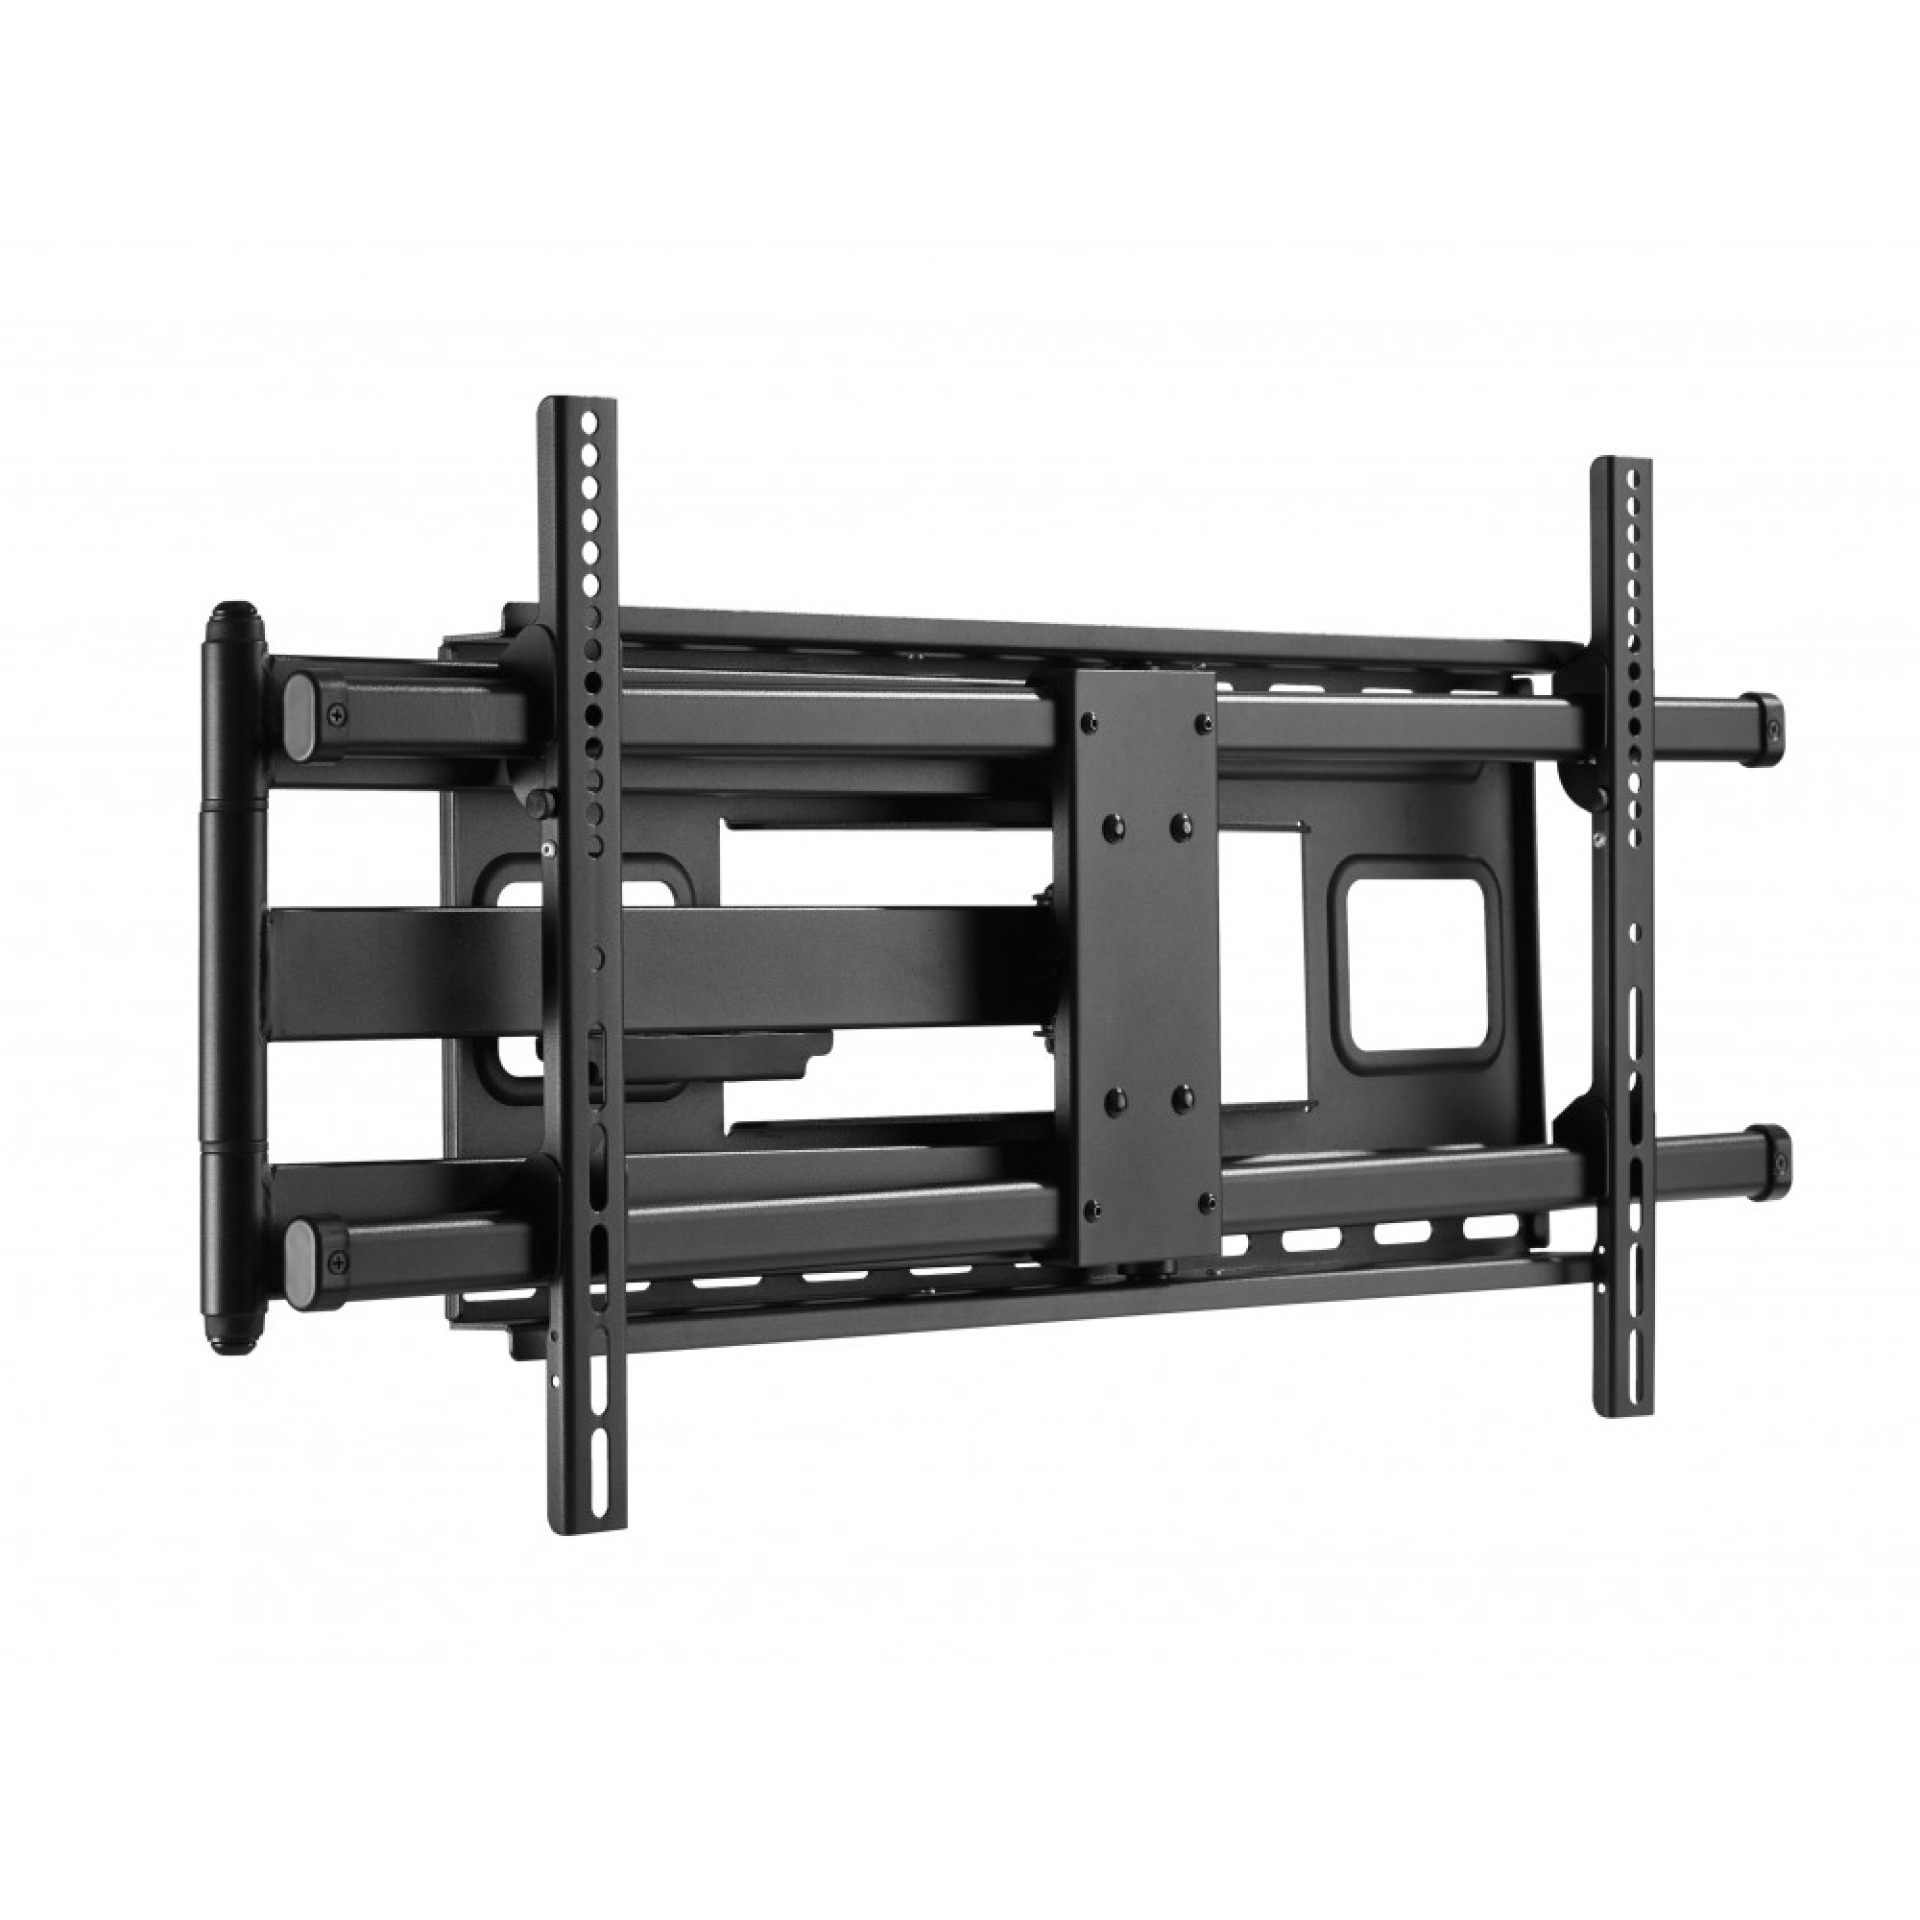 Wall support for LCD TV LED 43" - 80" , 1015mm wall distance, black